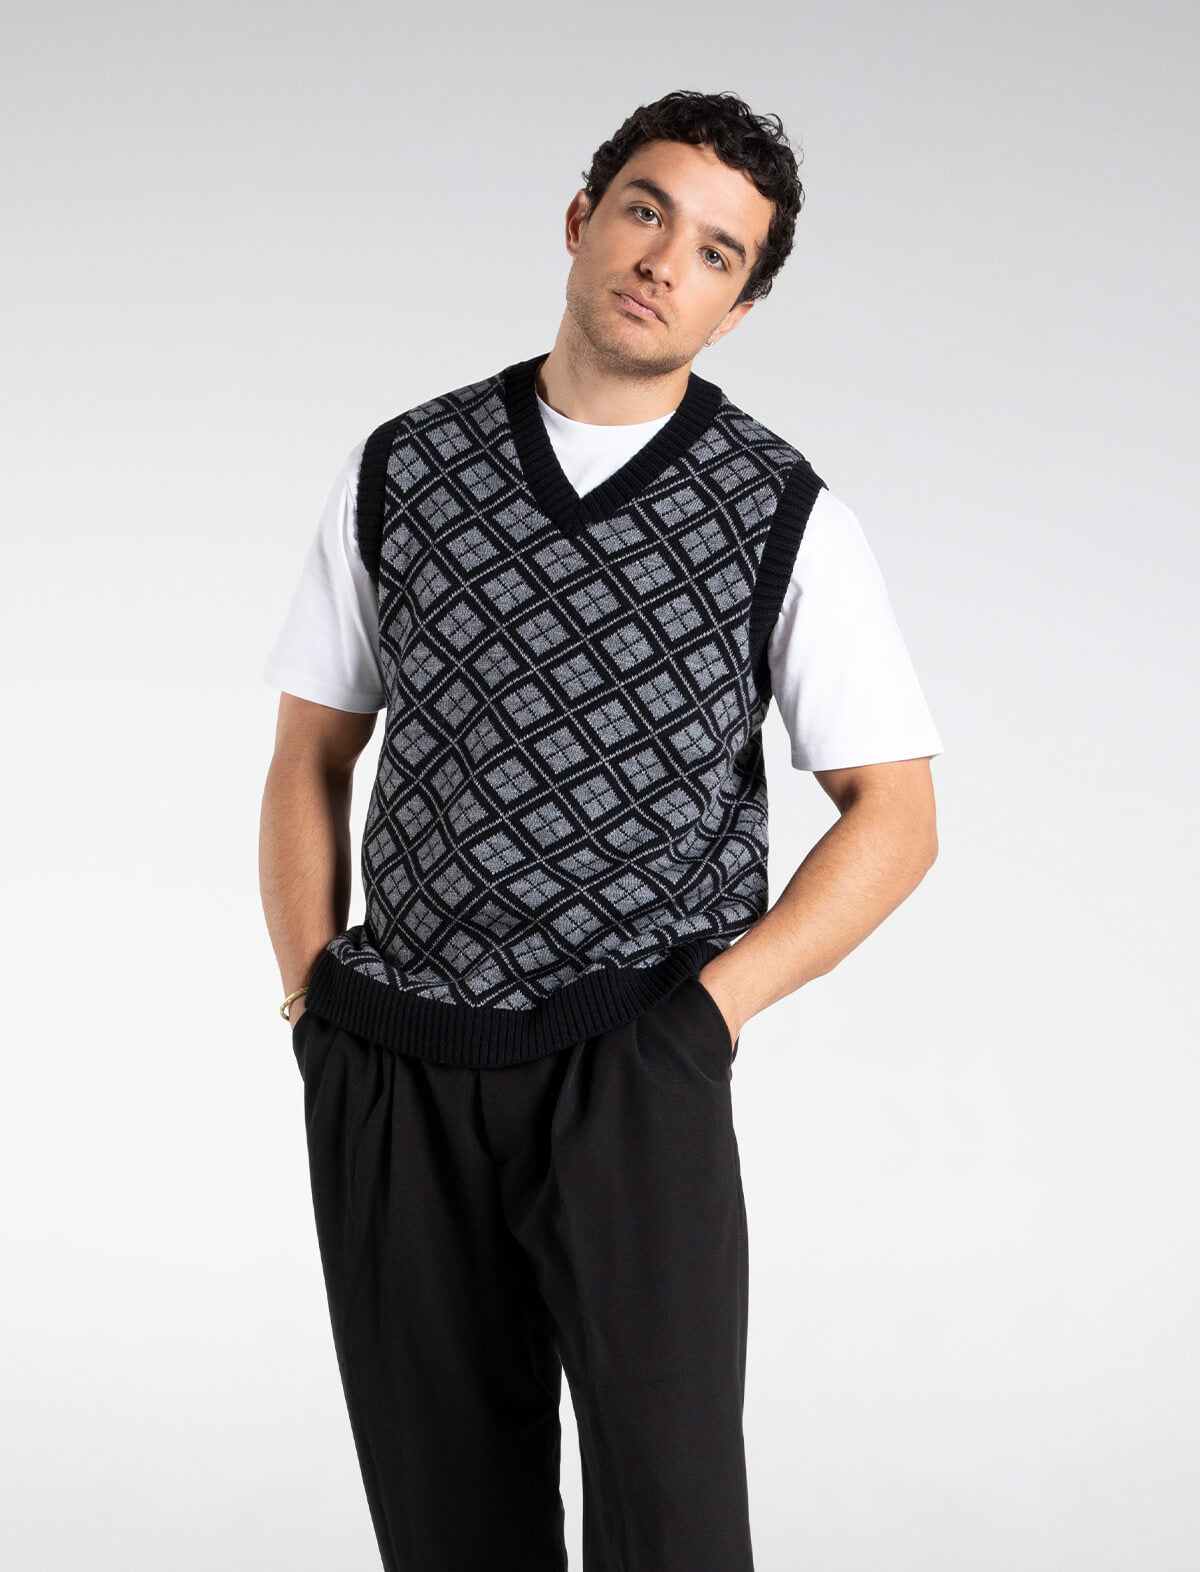 MANORS GOLF Checkered Vest in Black Grey